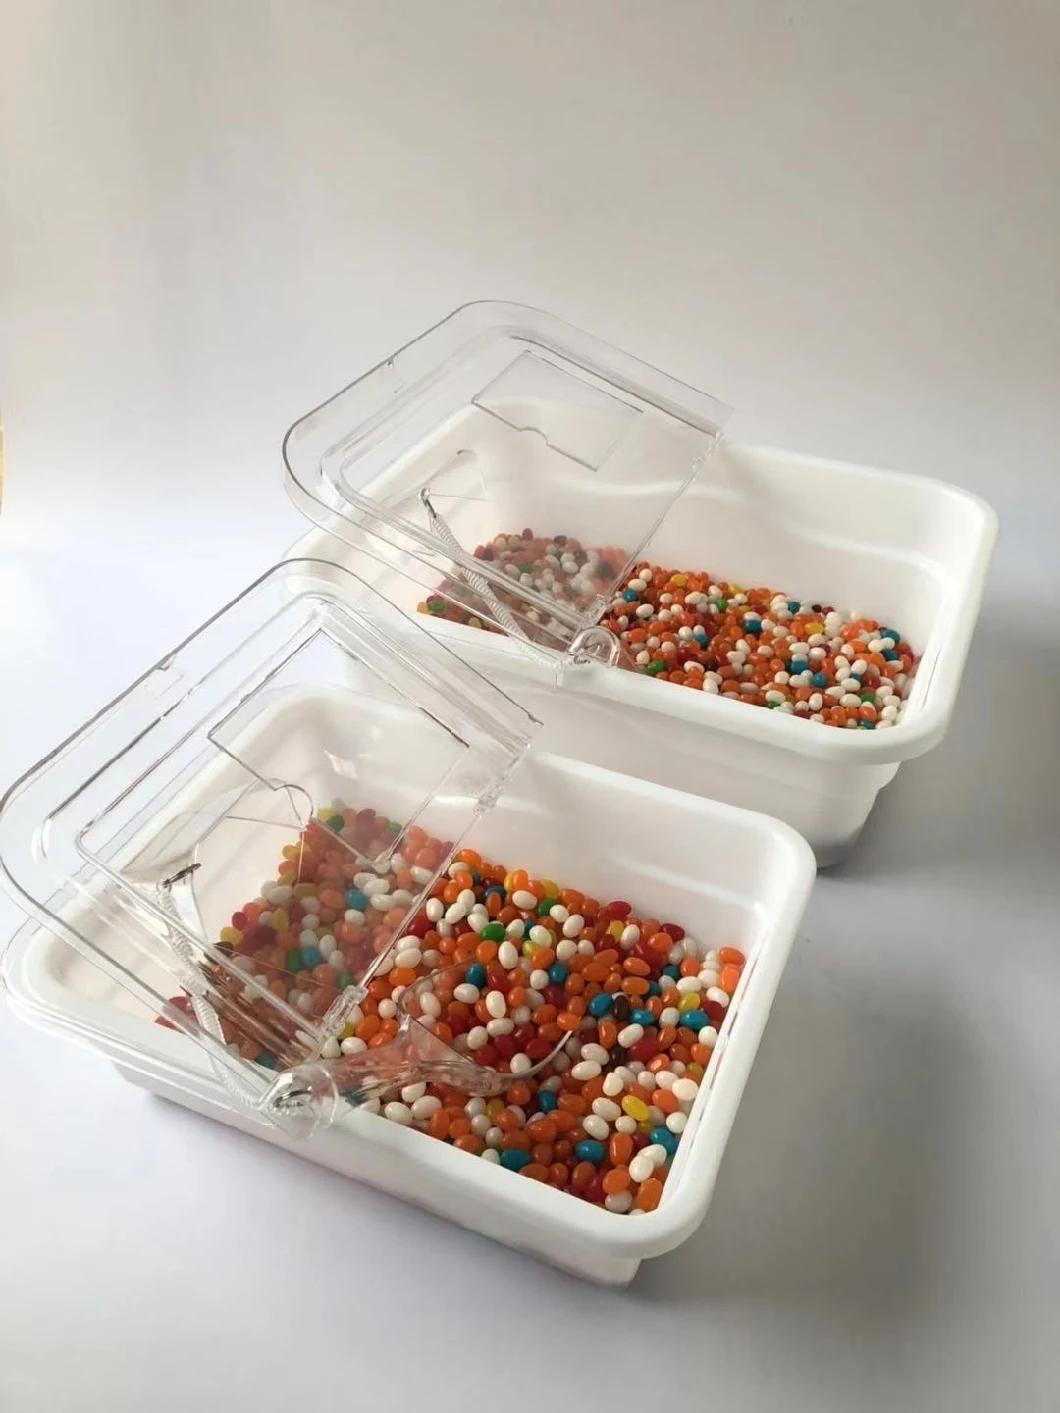 Wholesale Scoop Bins Dry Food Nut Bulk Cereal Bulk Candy Food Container